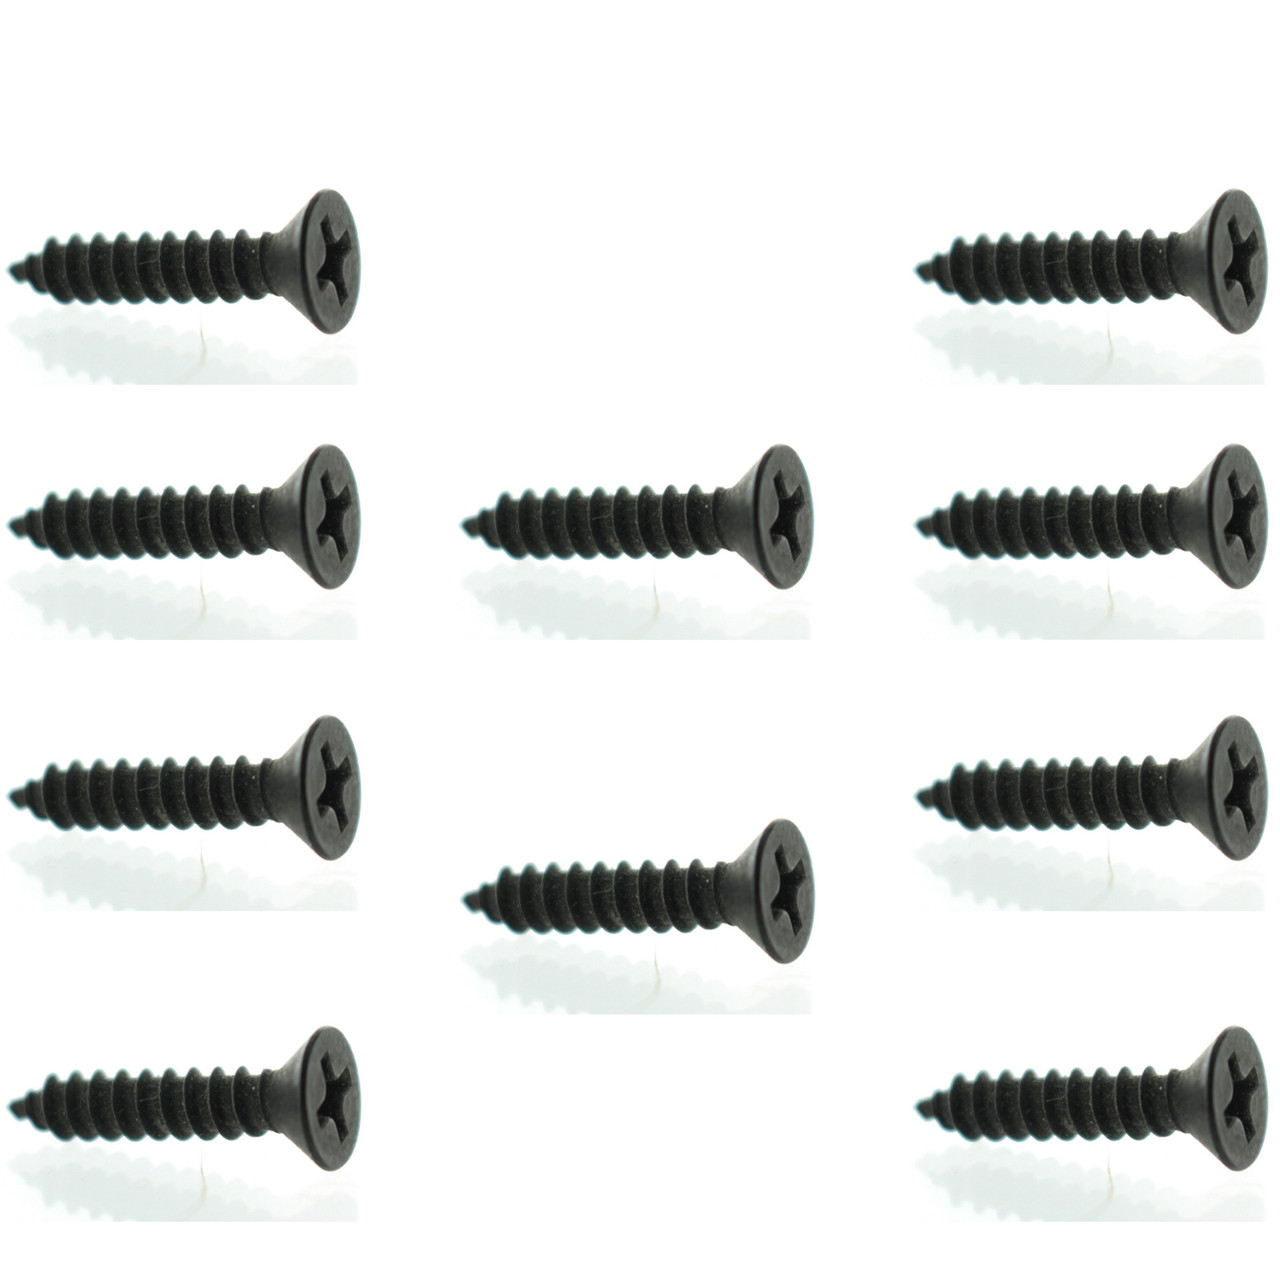 Sea-Doo New OEM Tapping Screw M3.5x19, Pack of 10, 250000092